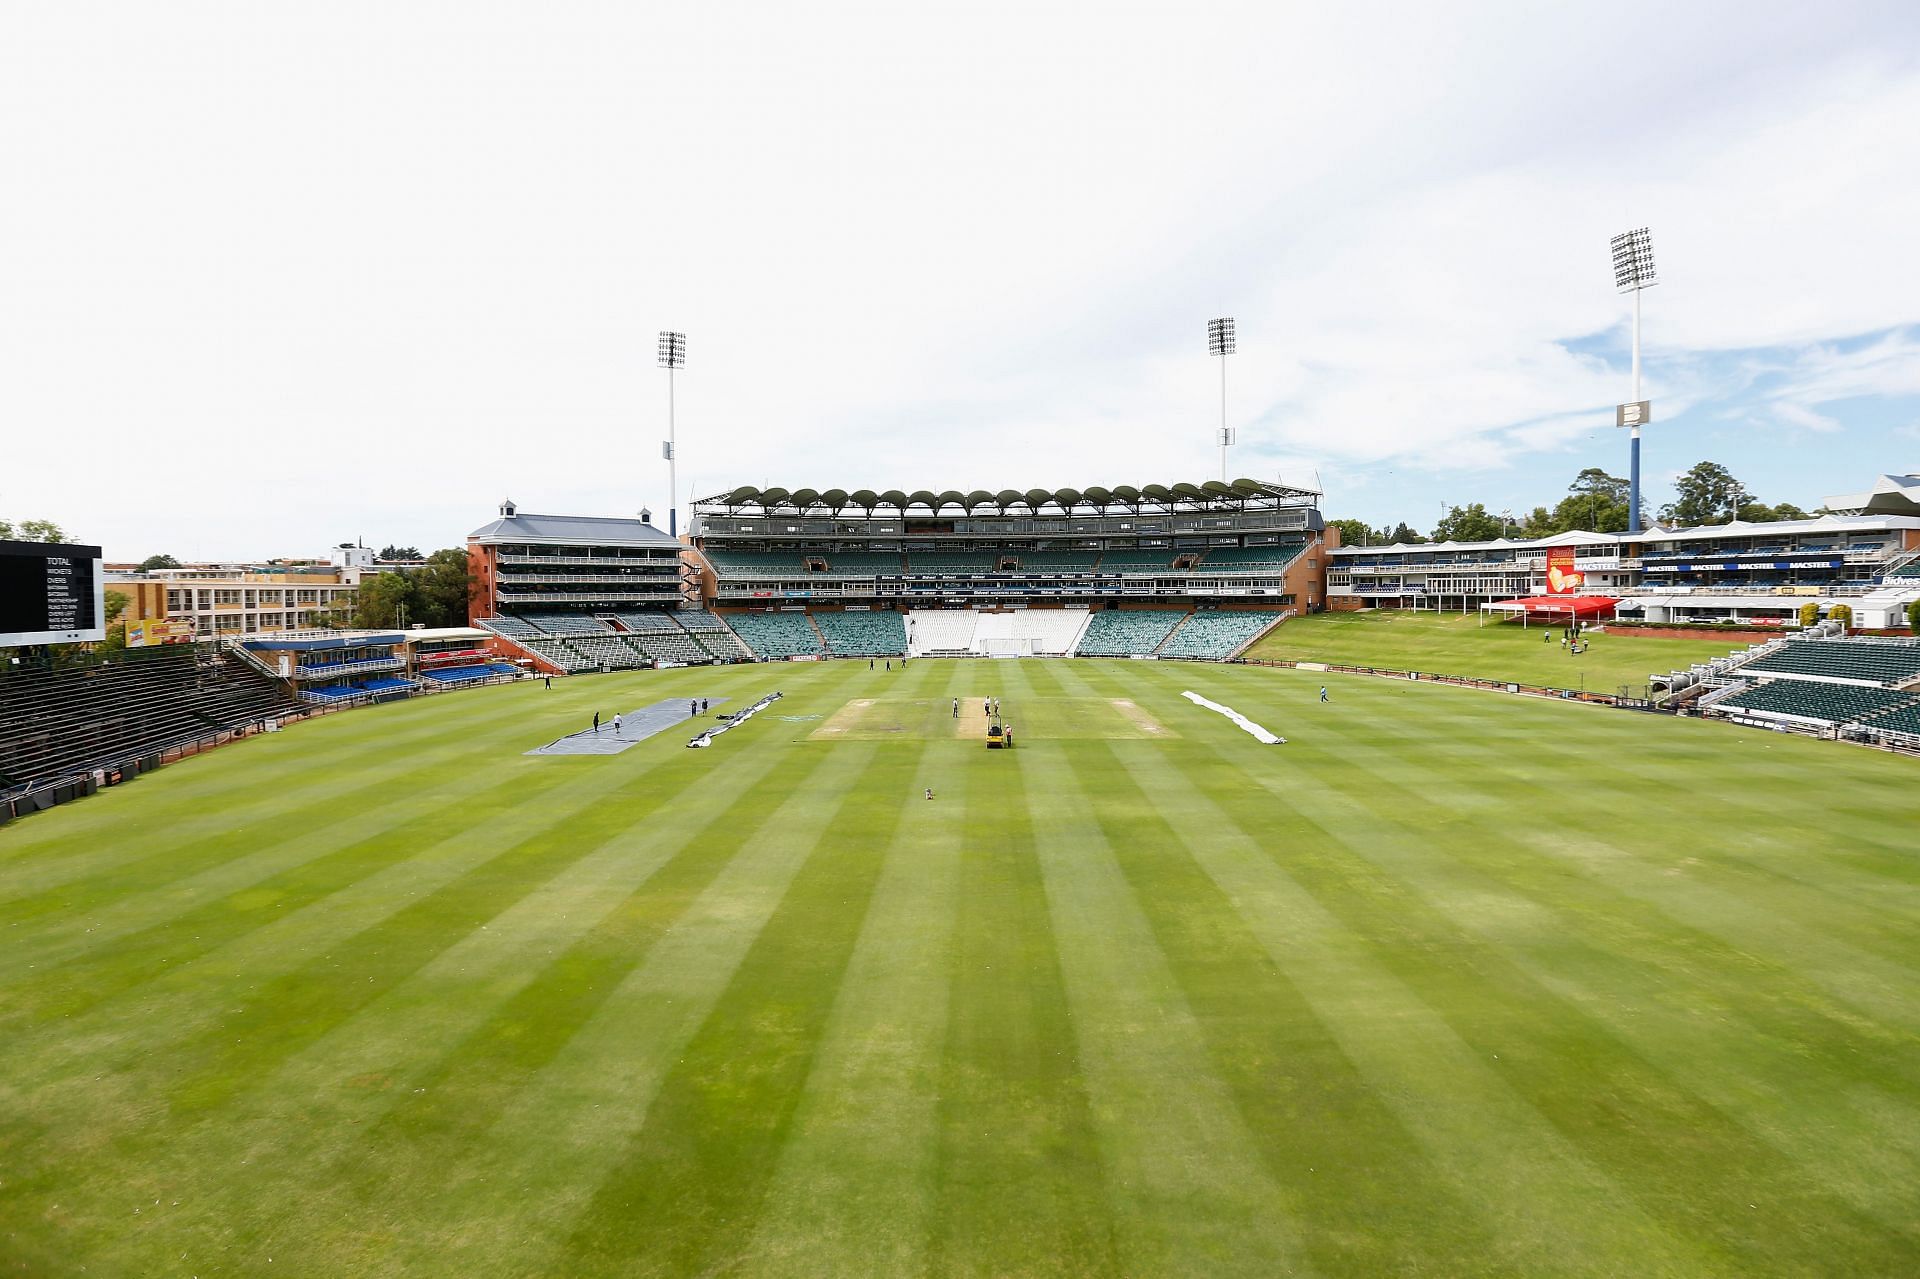 Johannesburg will host the second match of the ICC World Test Championship series between the Indian cricket team and the South African cricket team